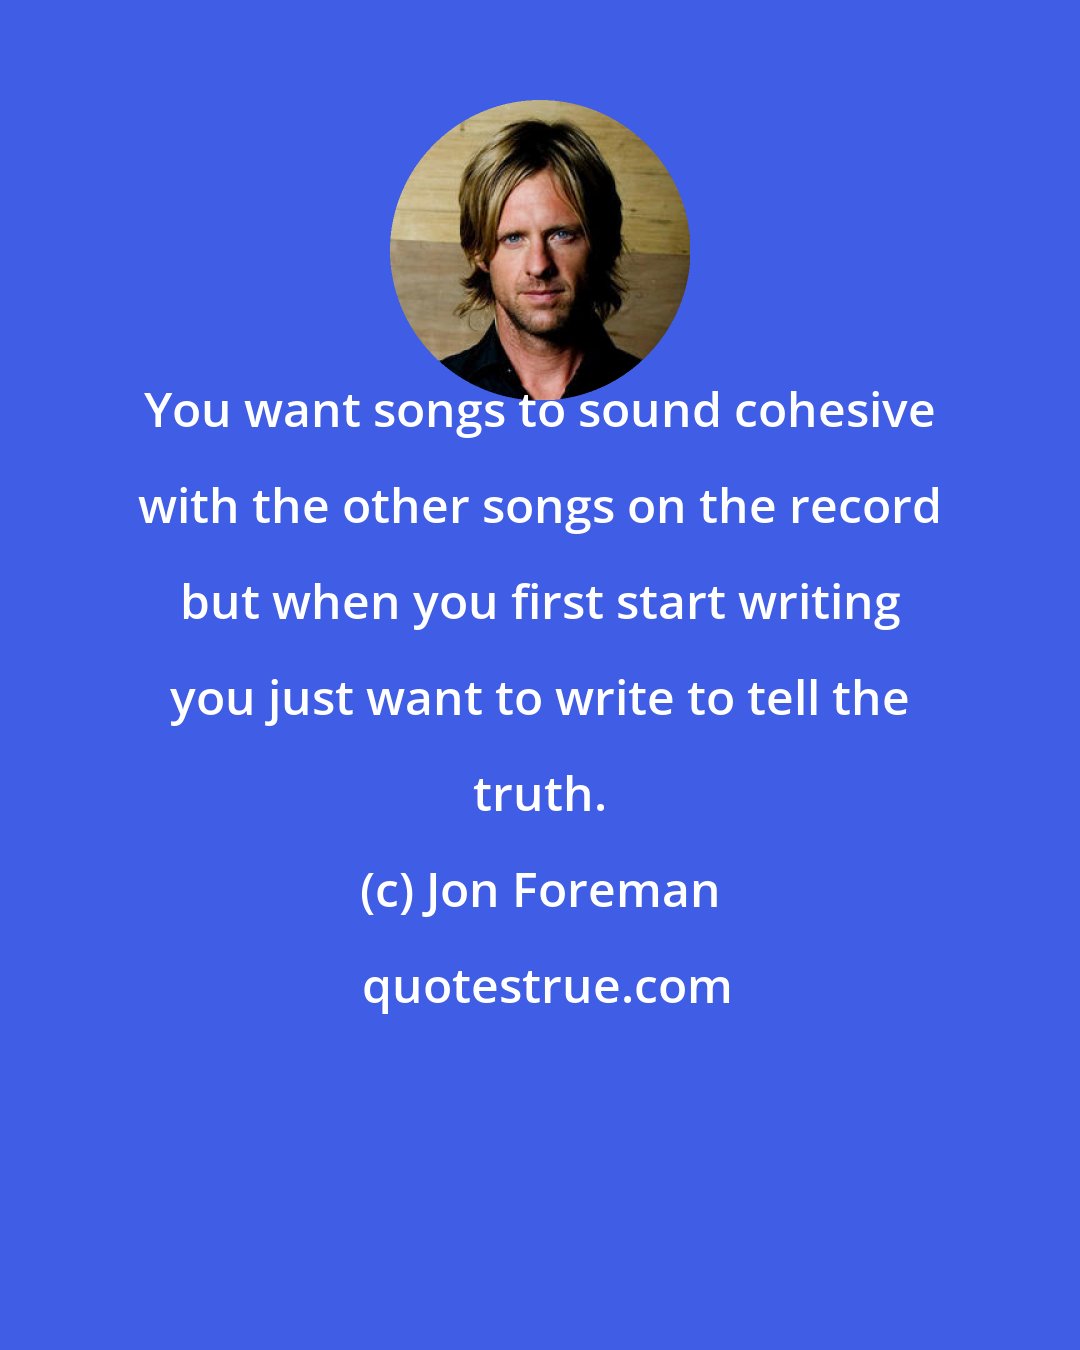 Jon Foreman: You want songs to sound cohesive with the other songs on the record but when you first start writing you just want to write to tell the truth.